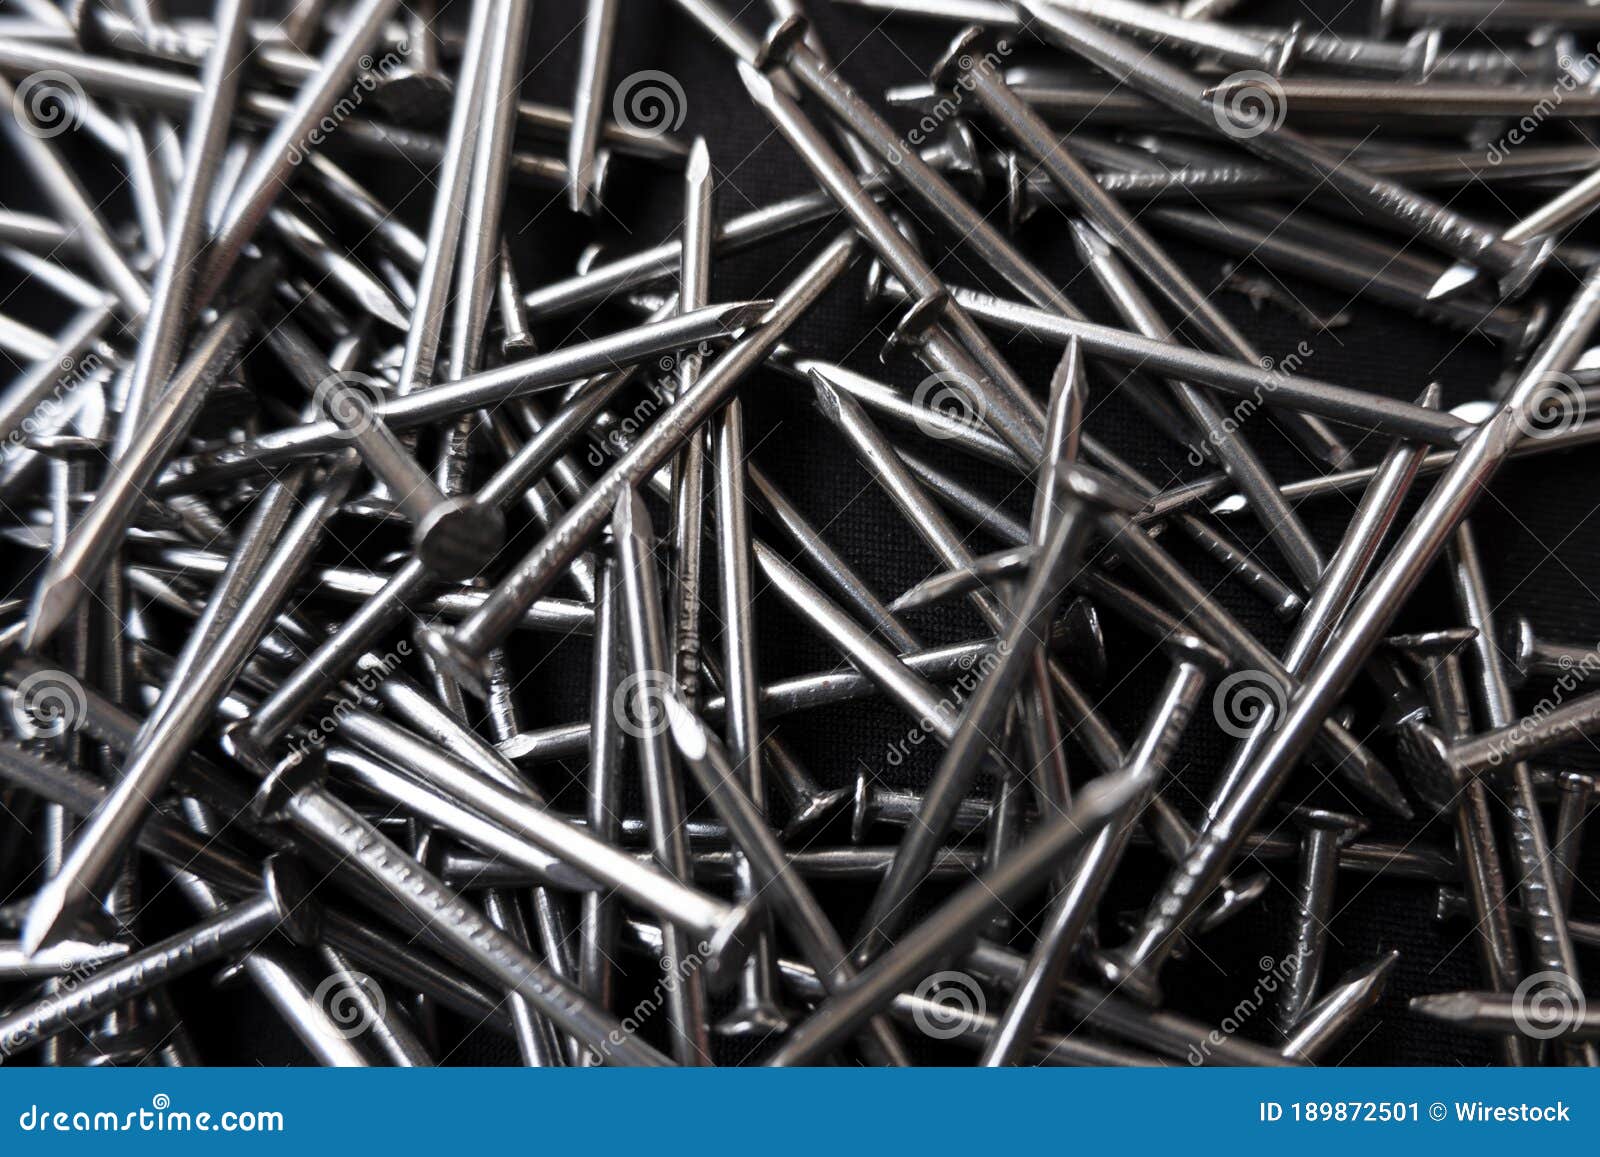 Closeup Shot of a Pile of Steel Nails on a Black Surface Stock Image ...